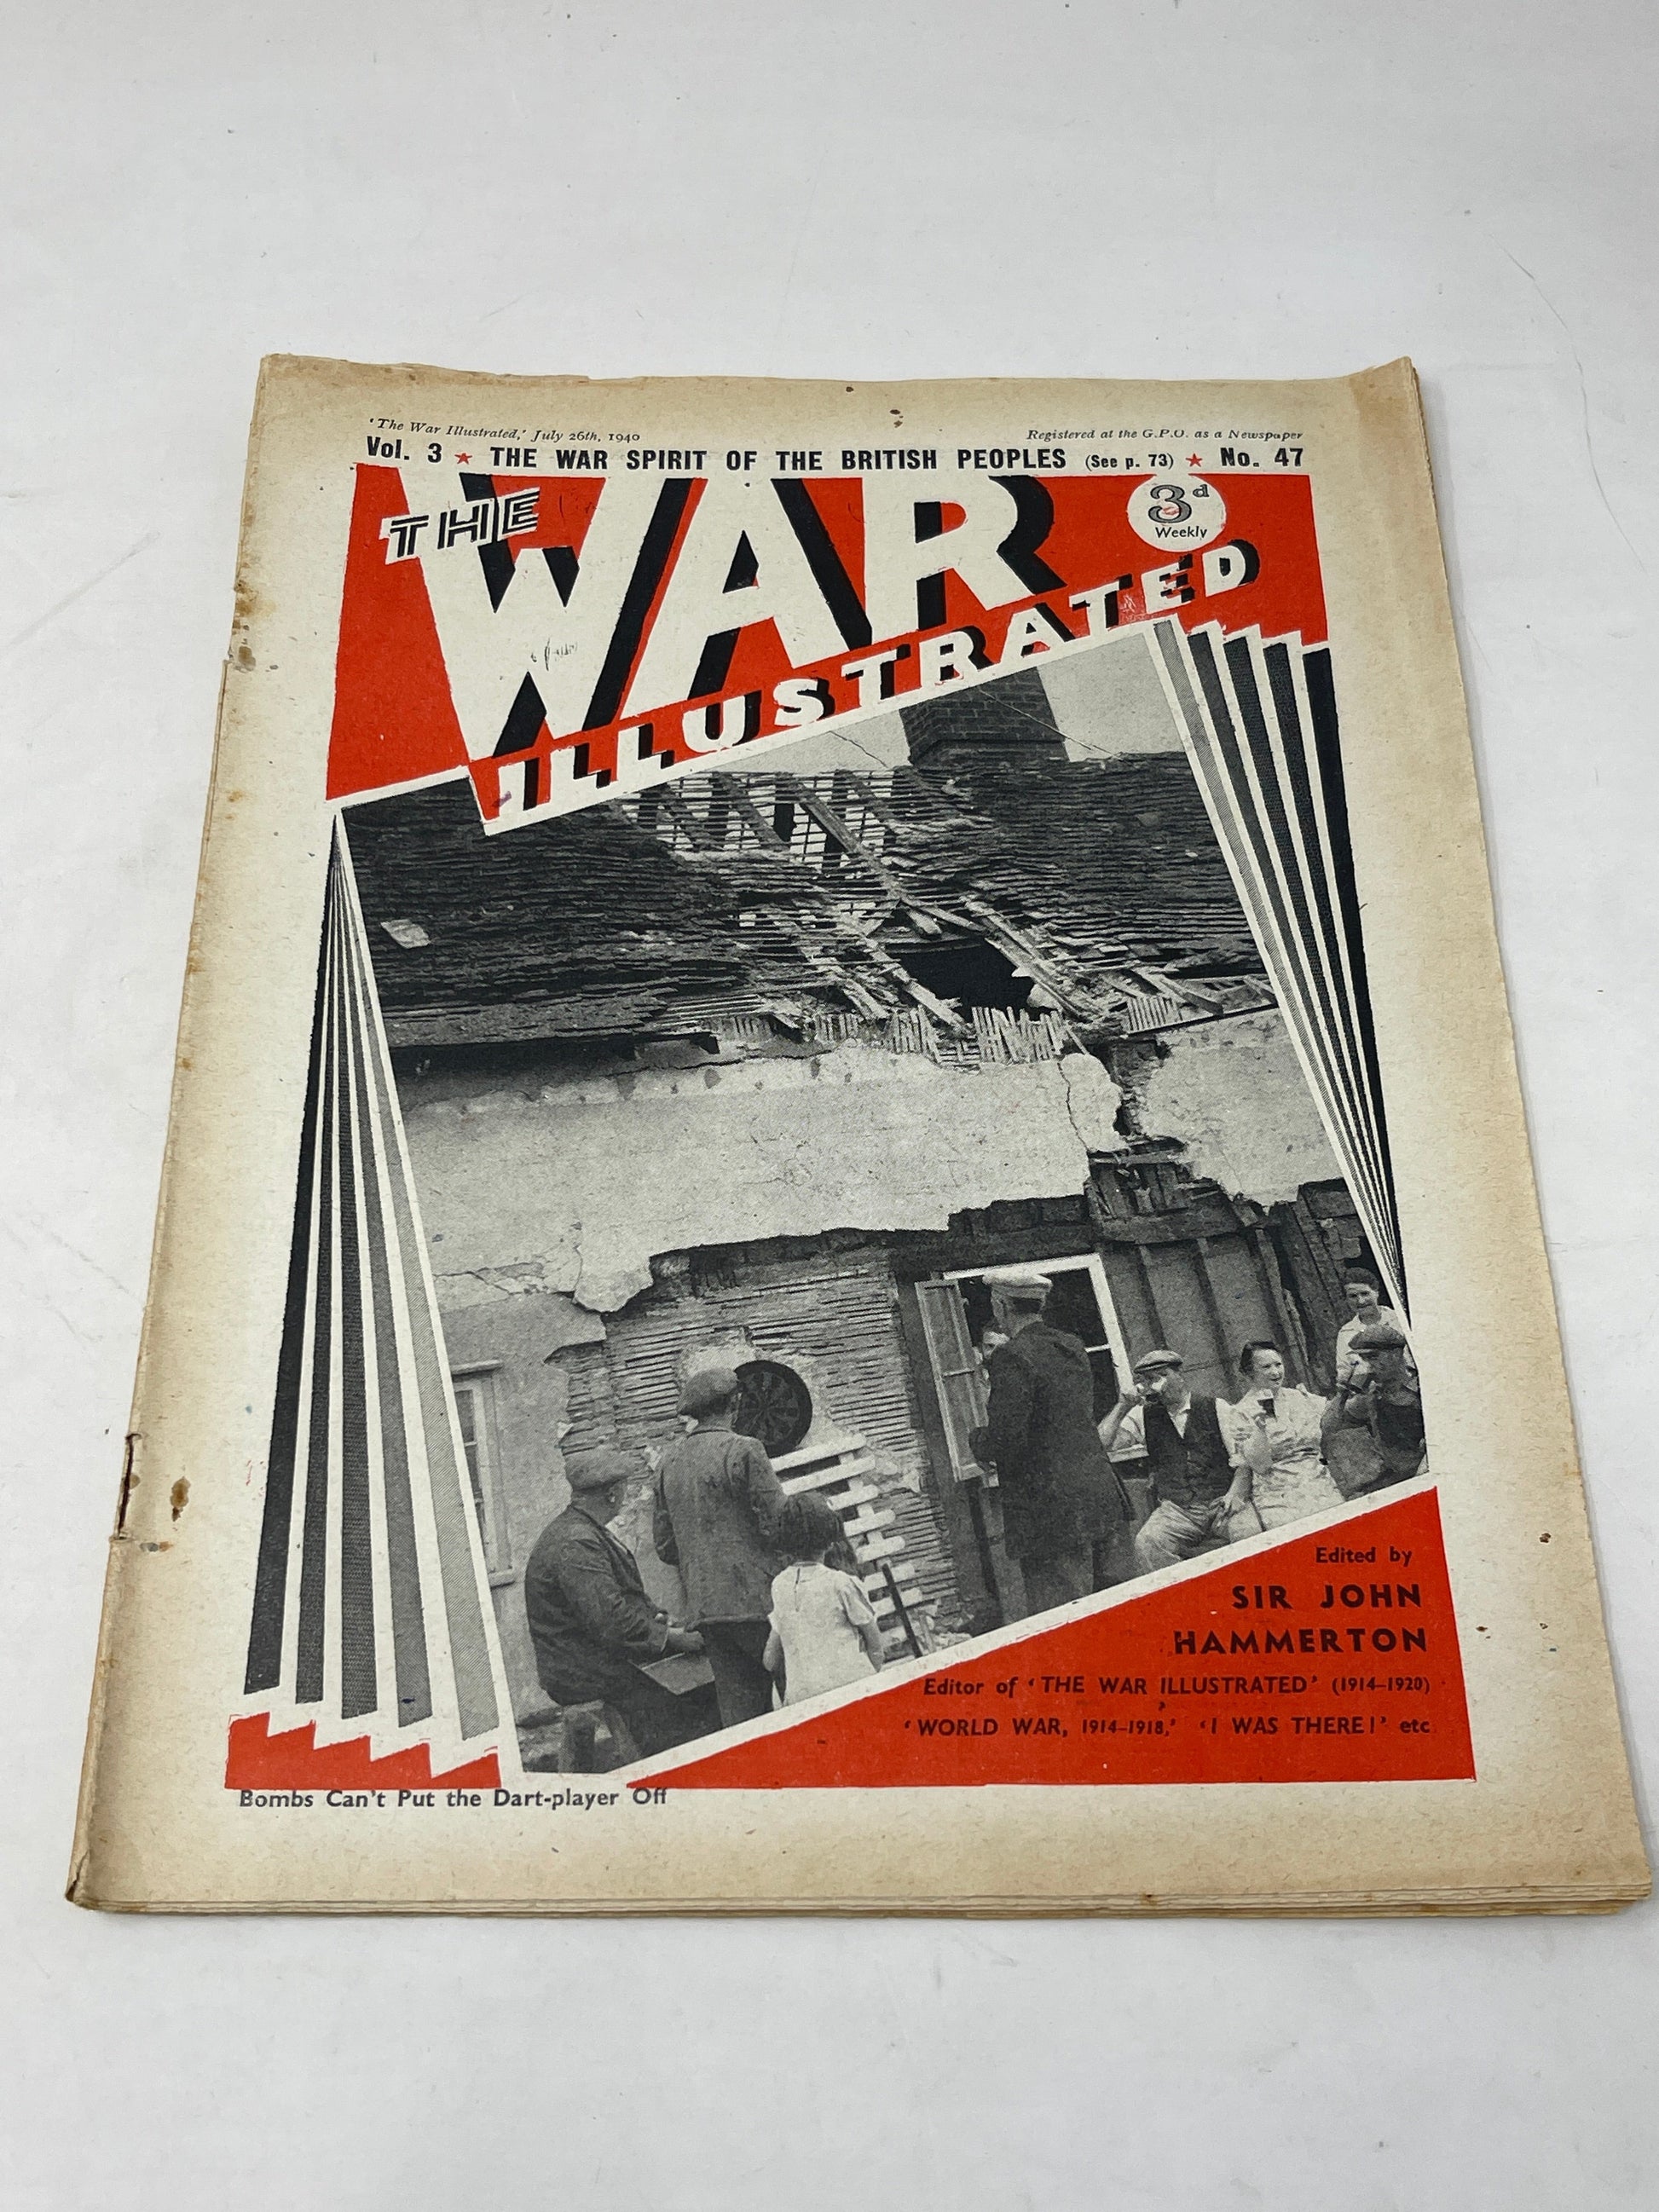 The War Illustrated